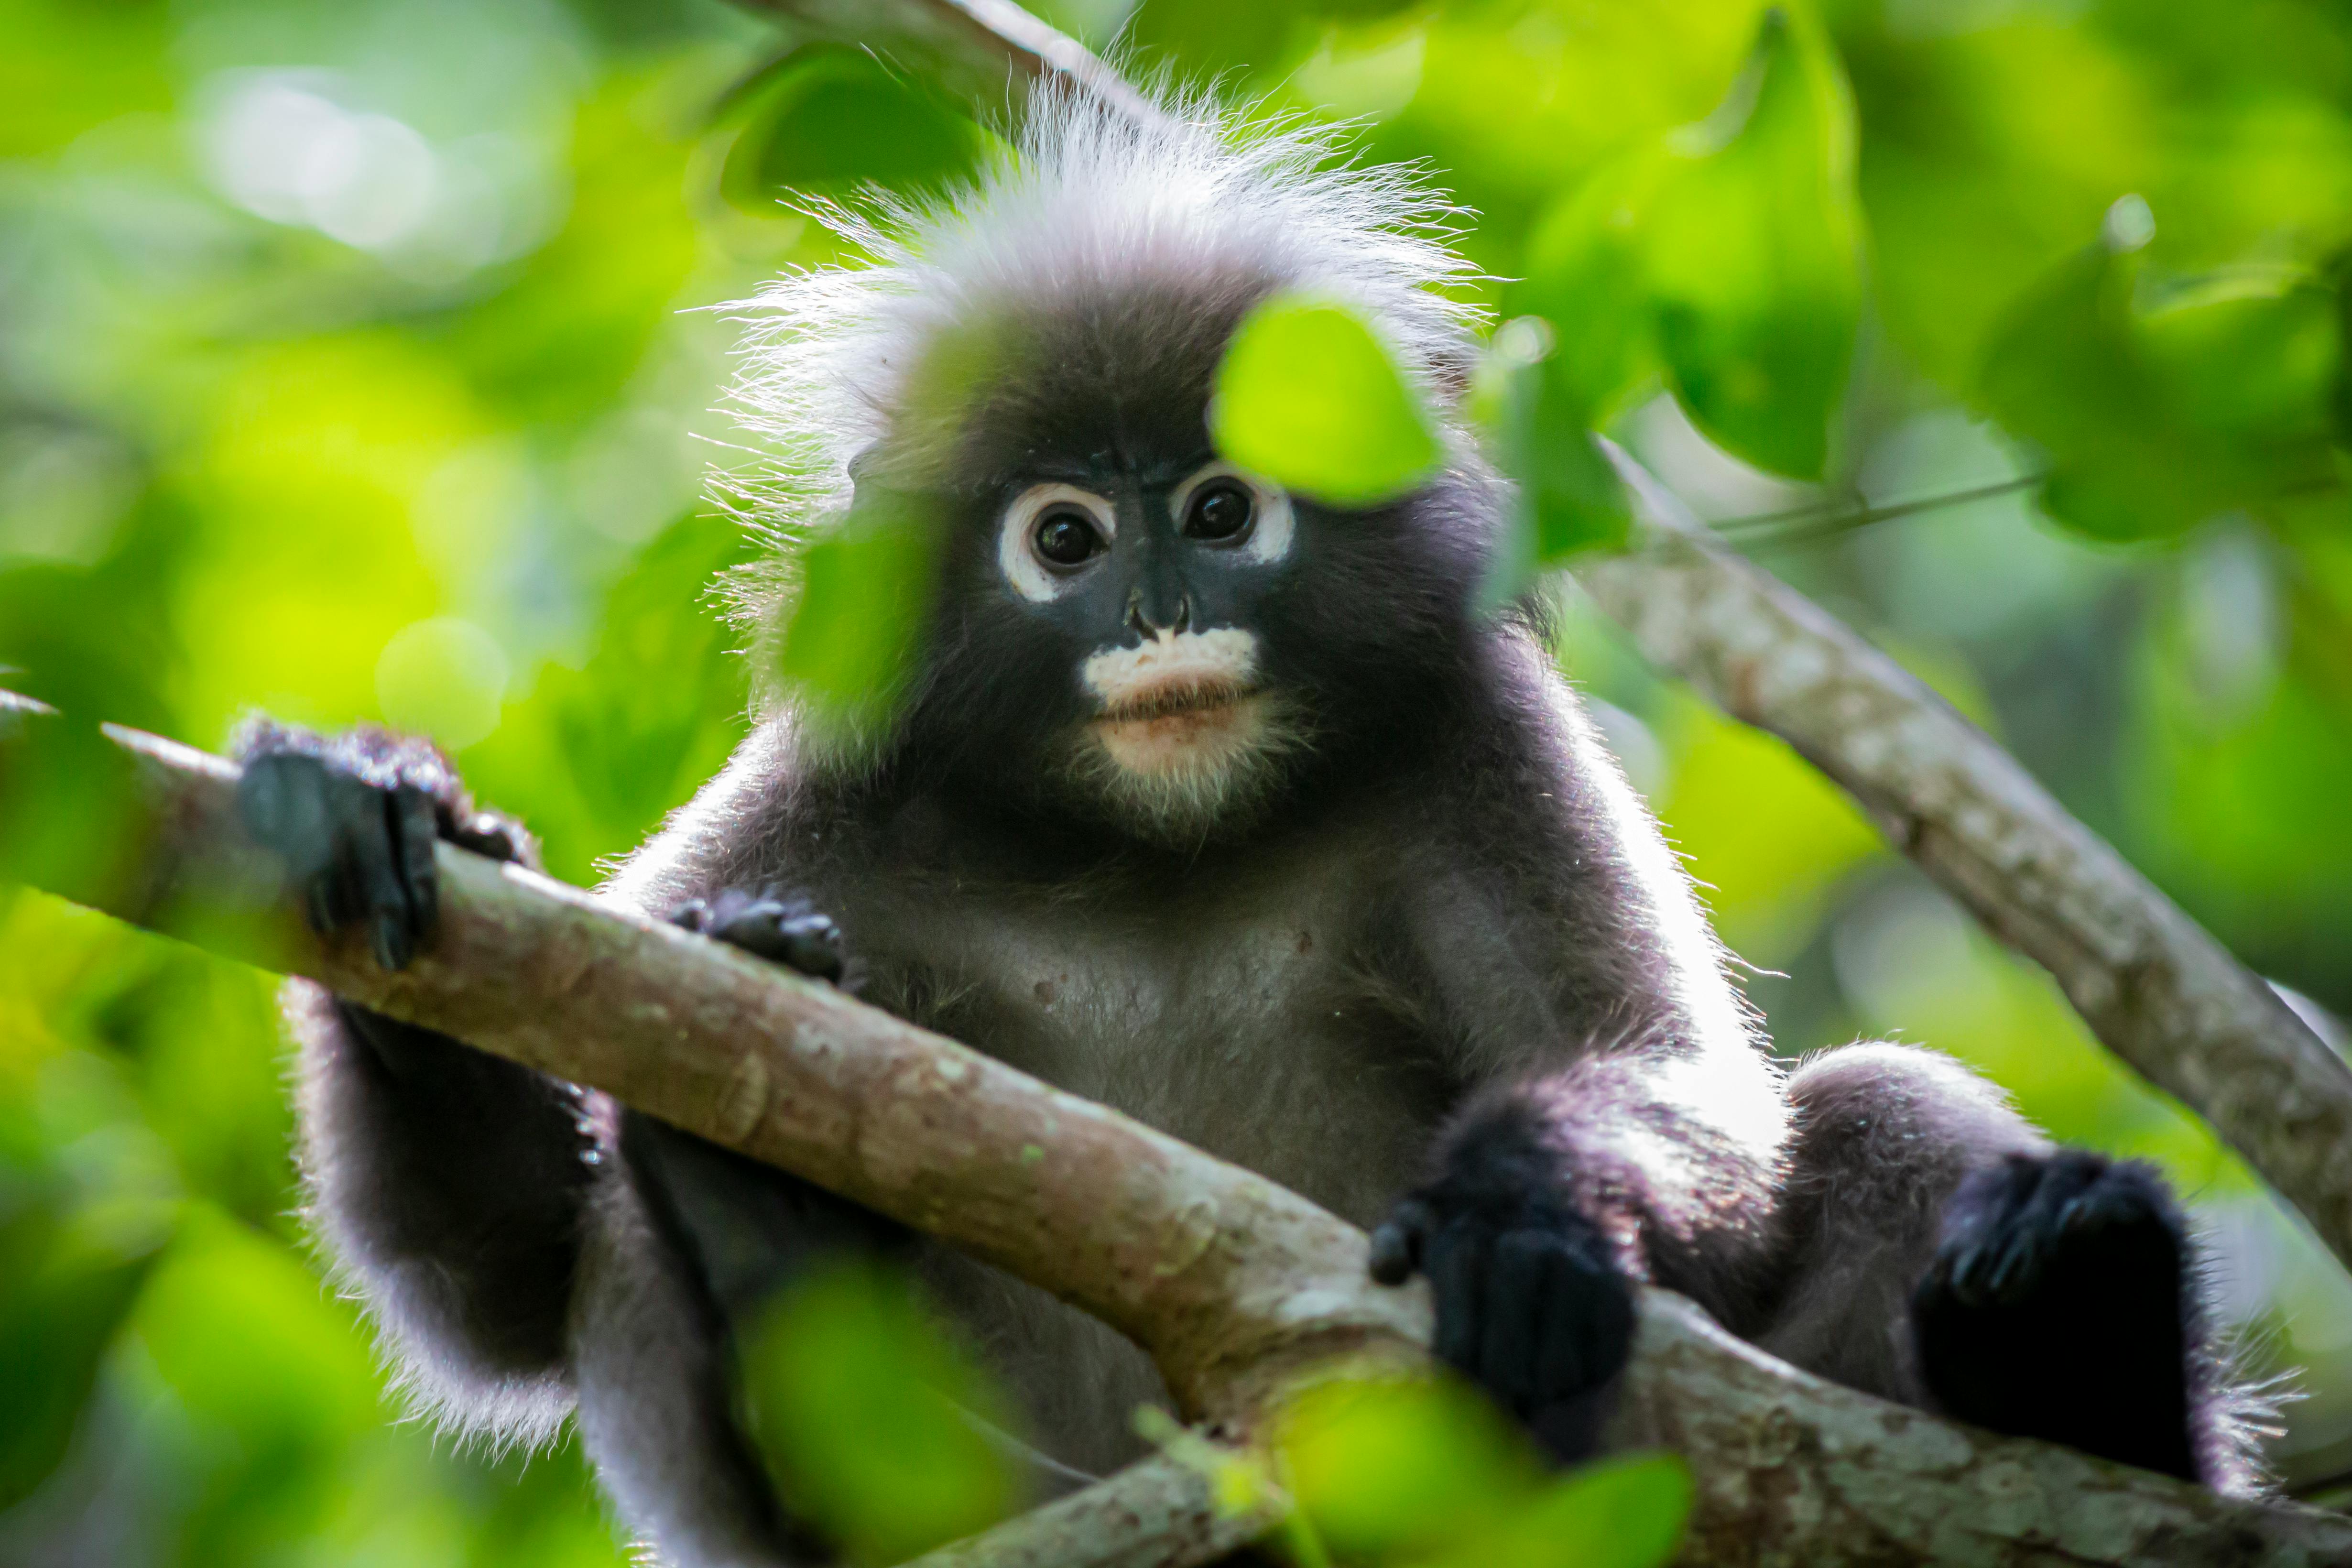 Dusky Leaf Monkey on Tree Branch in Close-up Photography · Free Stock Photo